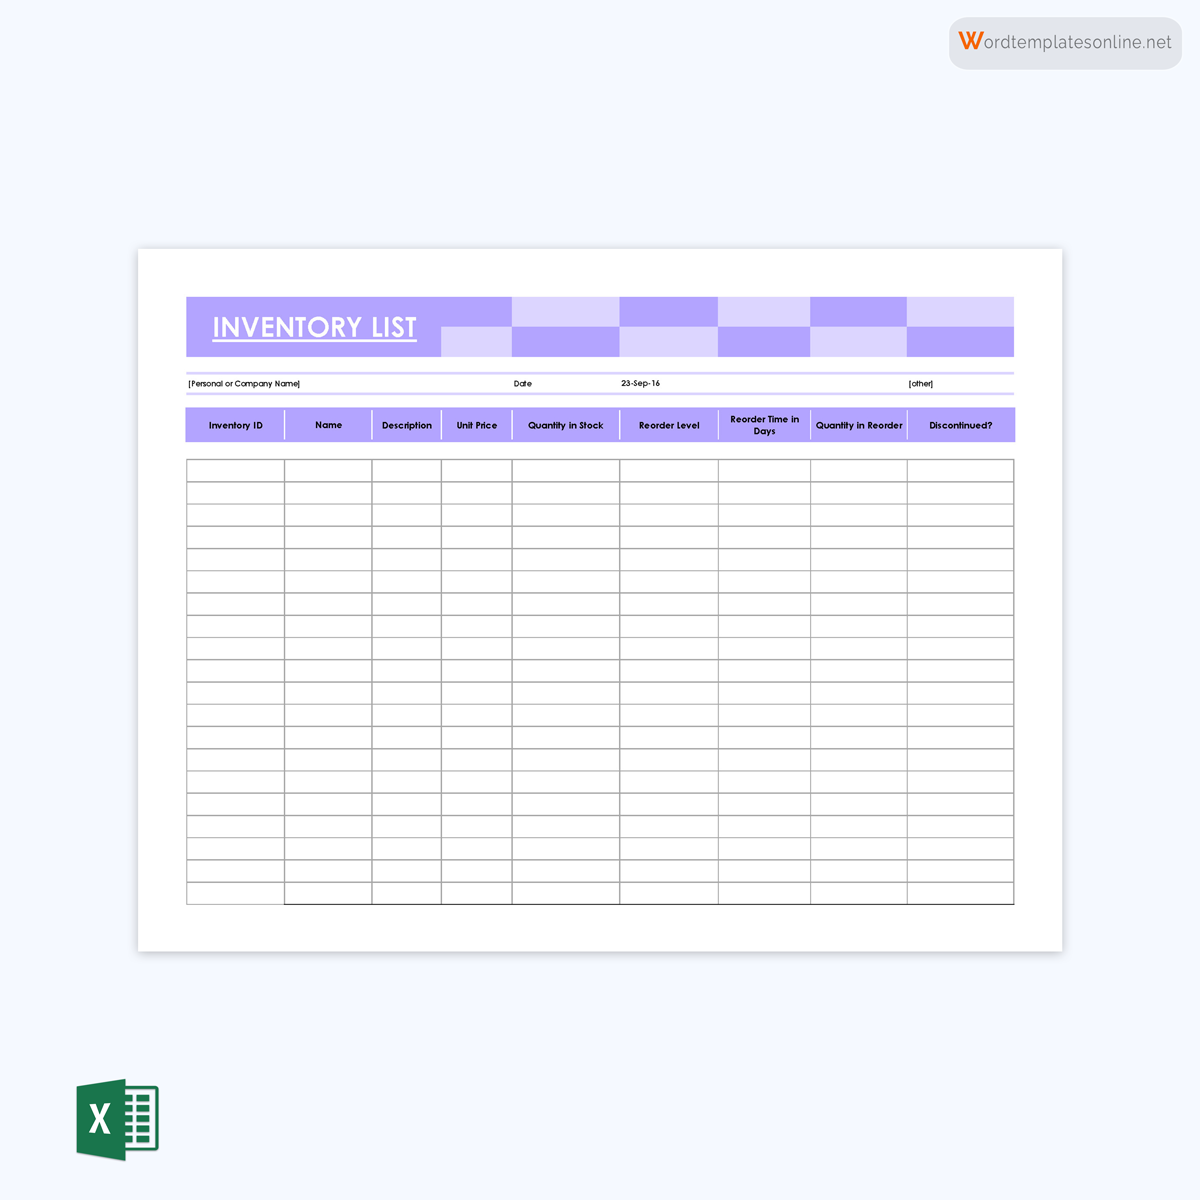 Inventory tracking form template - Excel format